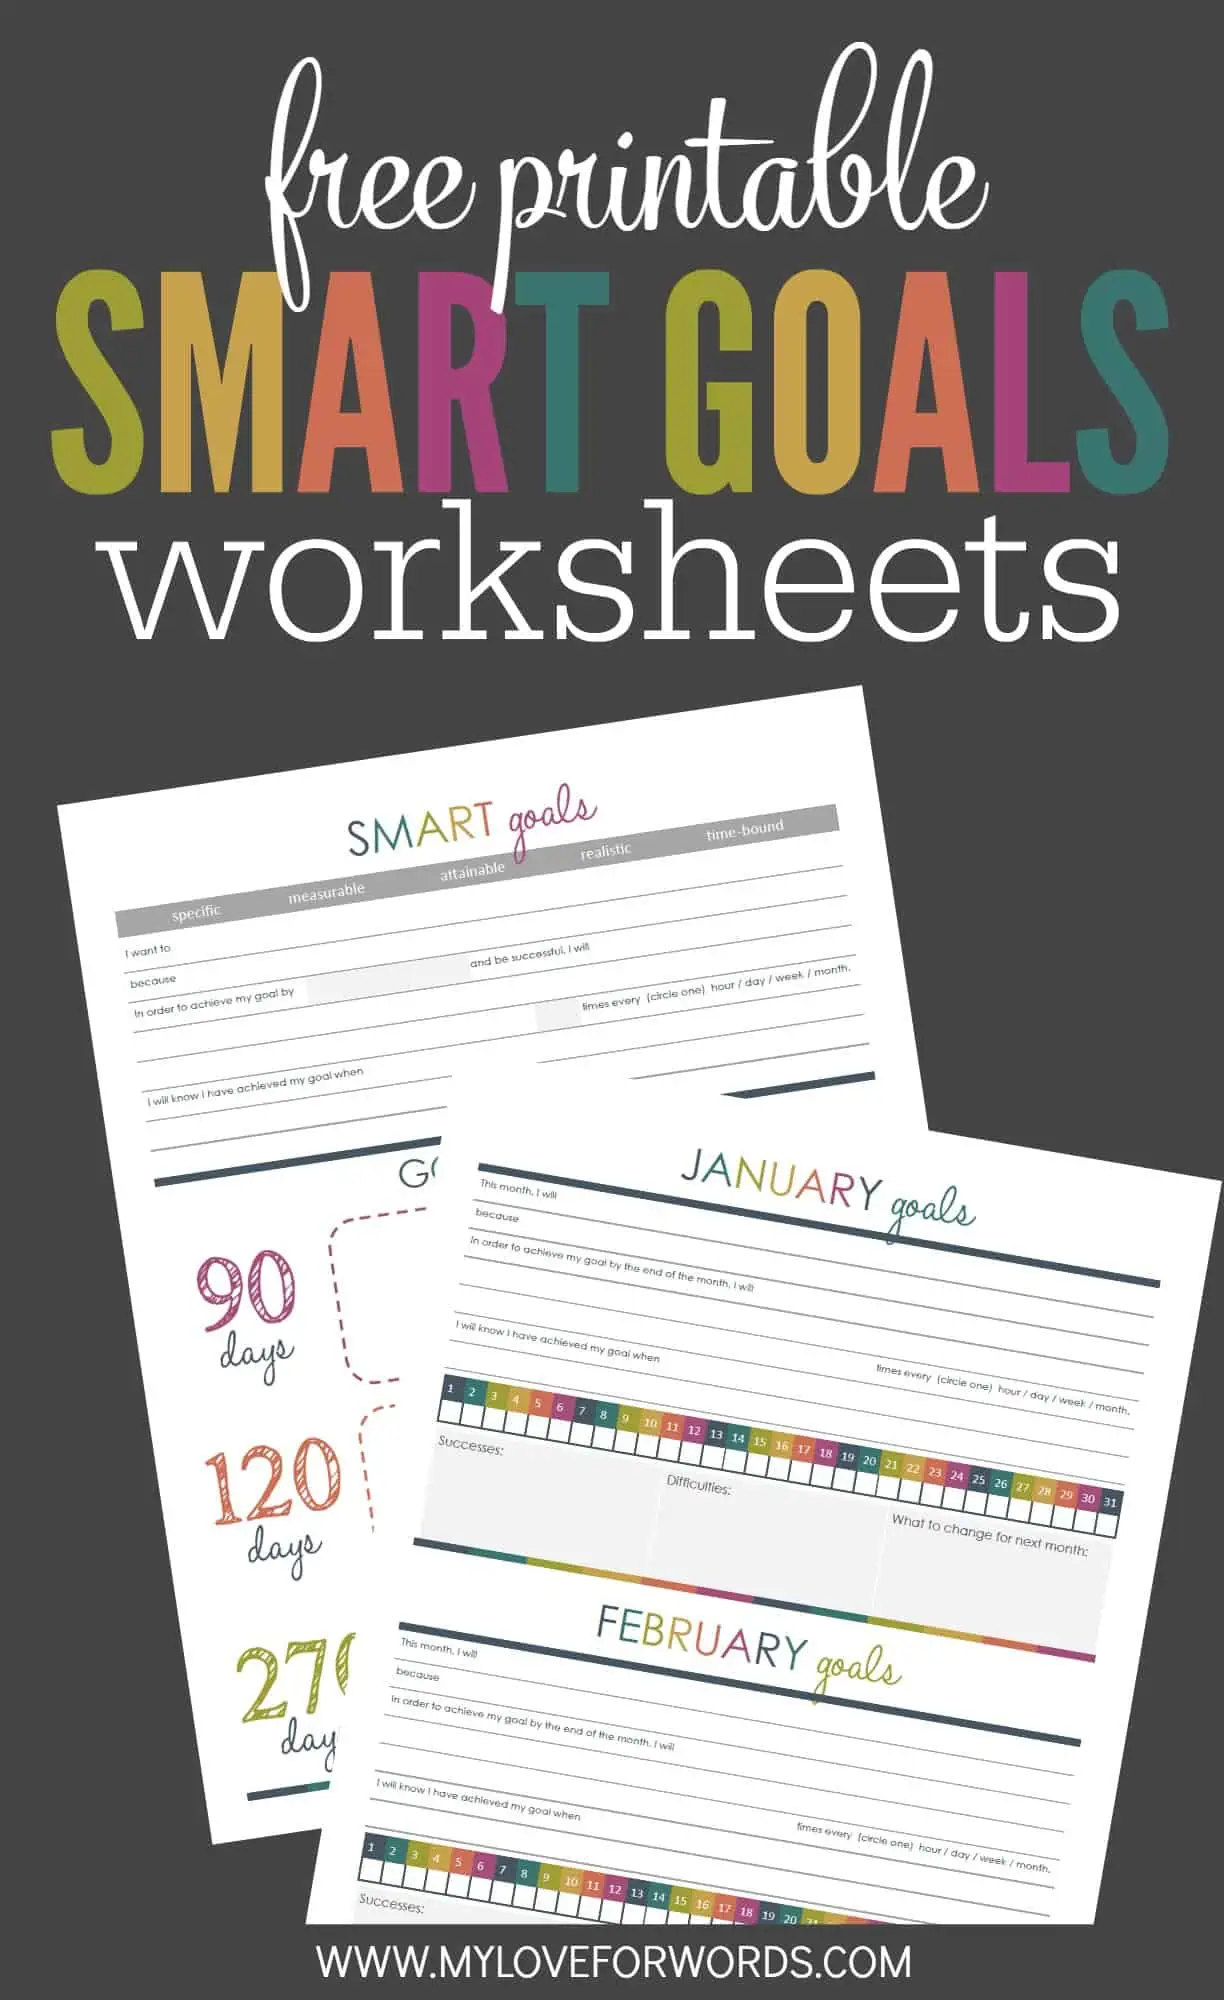 Setting smart goals is a great way to stay on task and achieve your dreams. Whether they're New Year's Resolutions or goals you've tried to achieve over and over again, reworking them to be SMART goals can make the difference you need to finally achieve them, and these free printable worksheets will show you how to turn them into smart goals and track your successes.